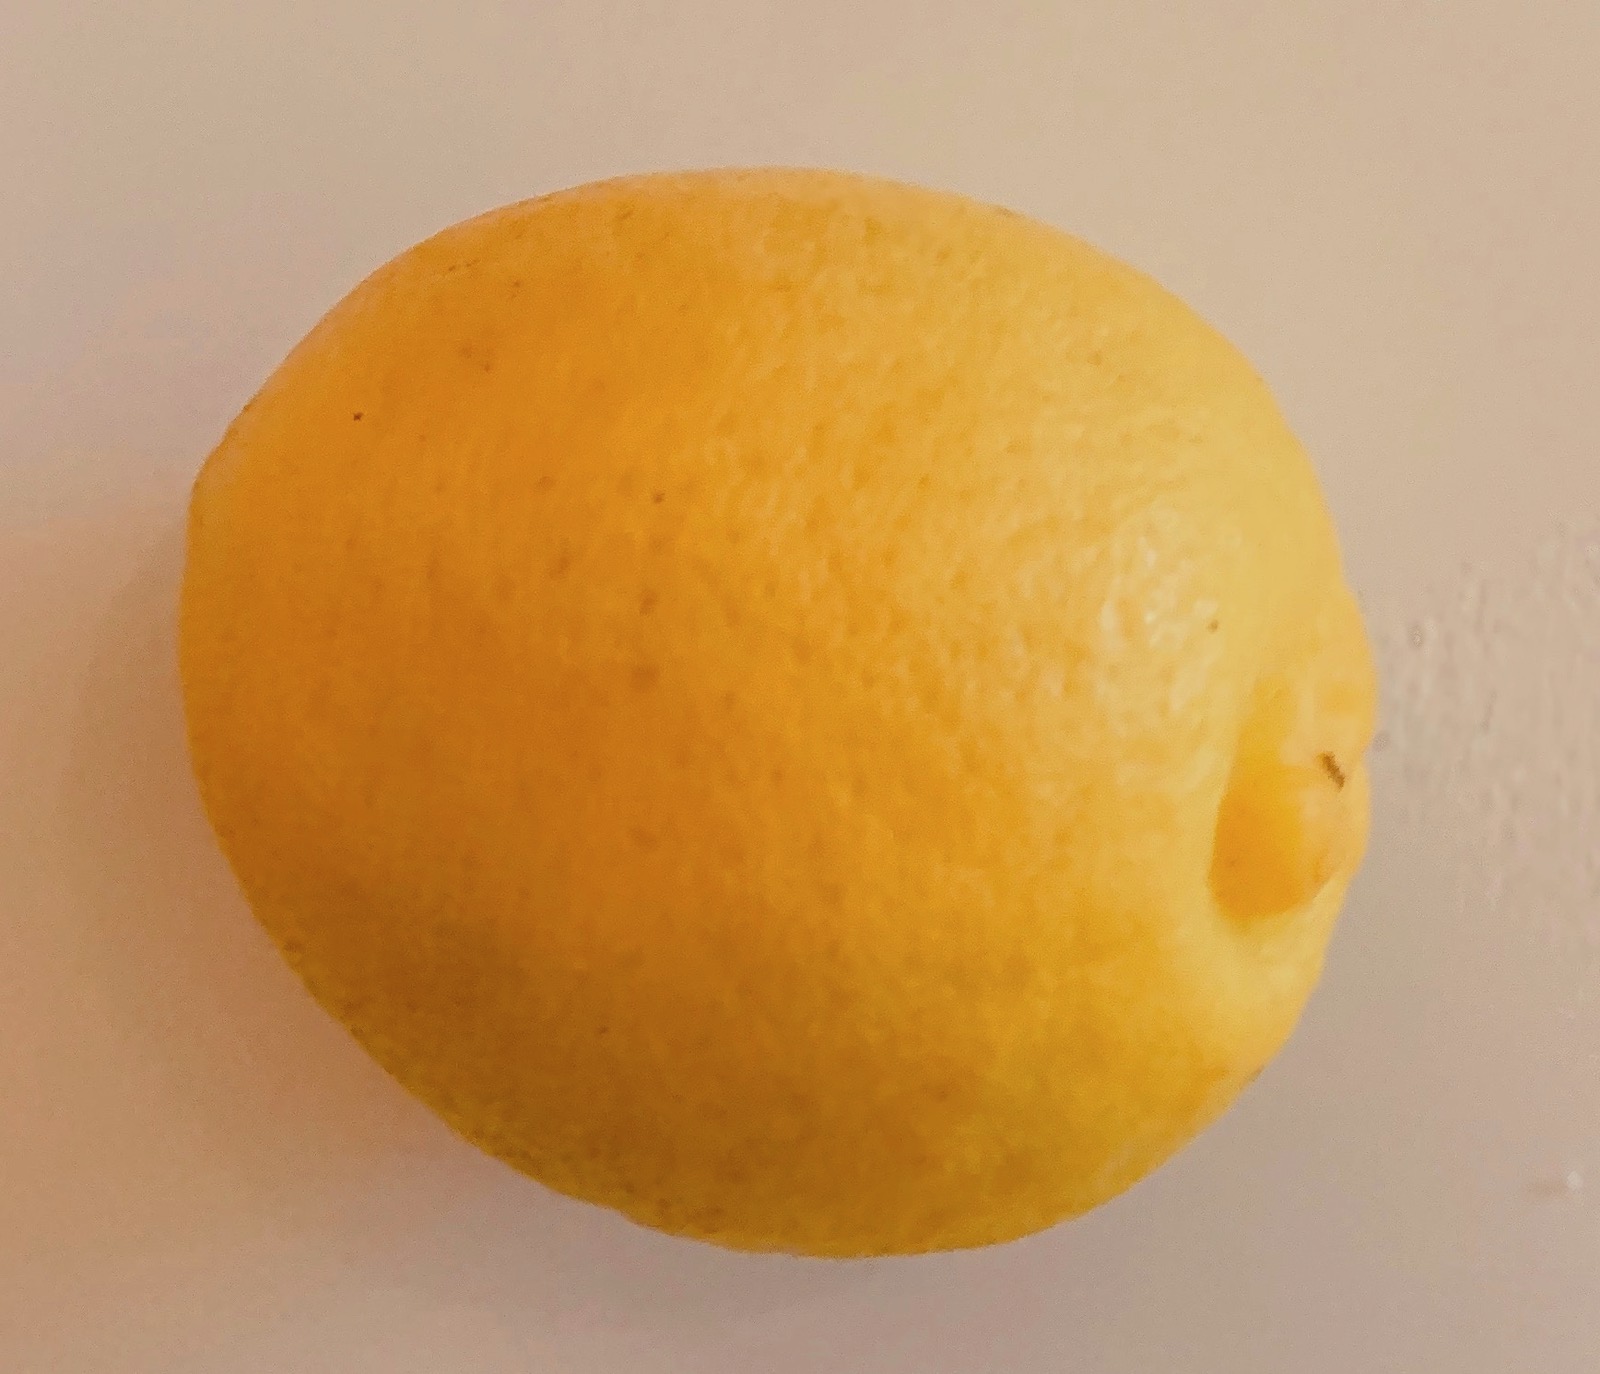 My Experience With The California Lemon Law